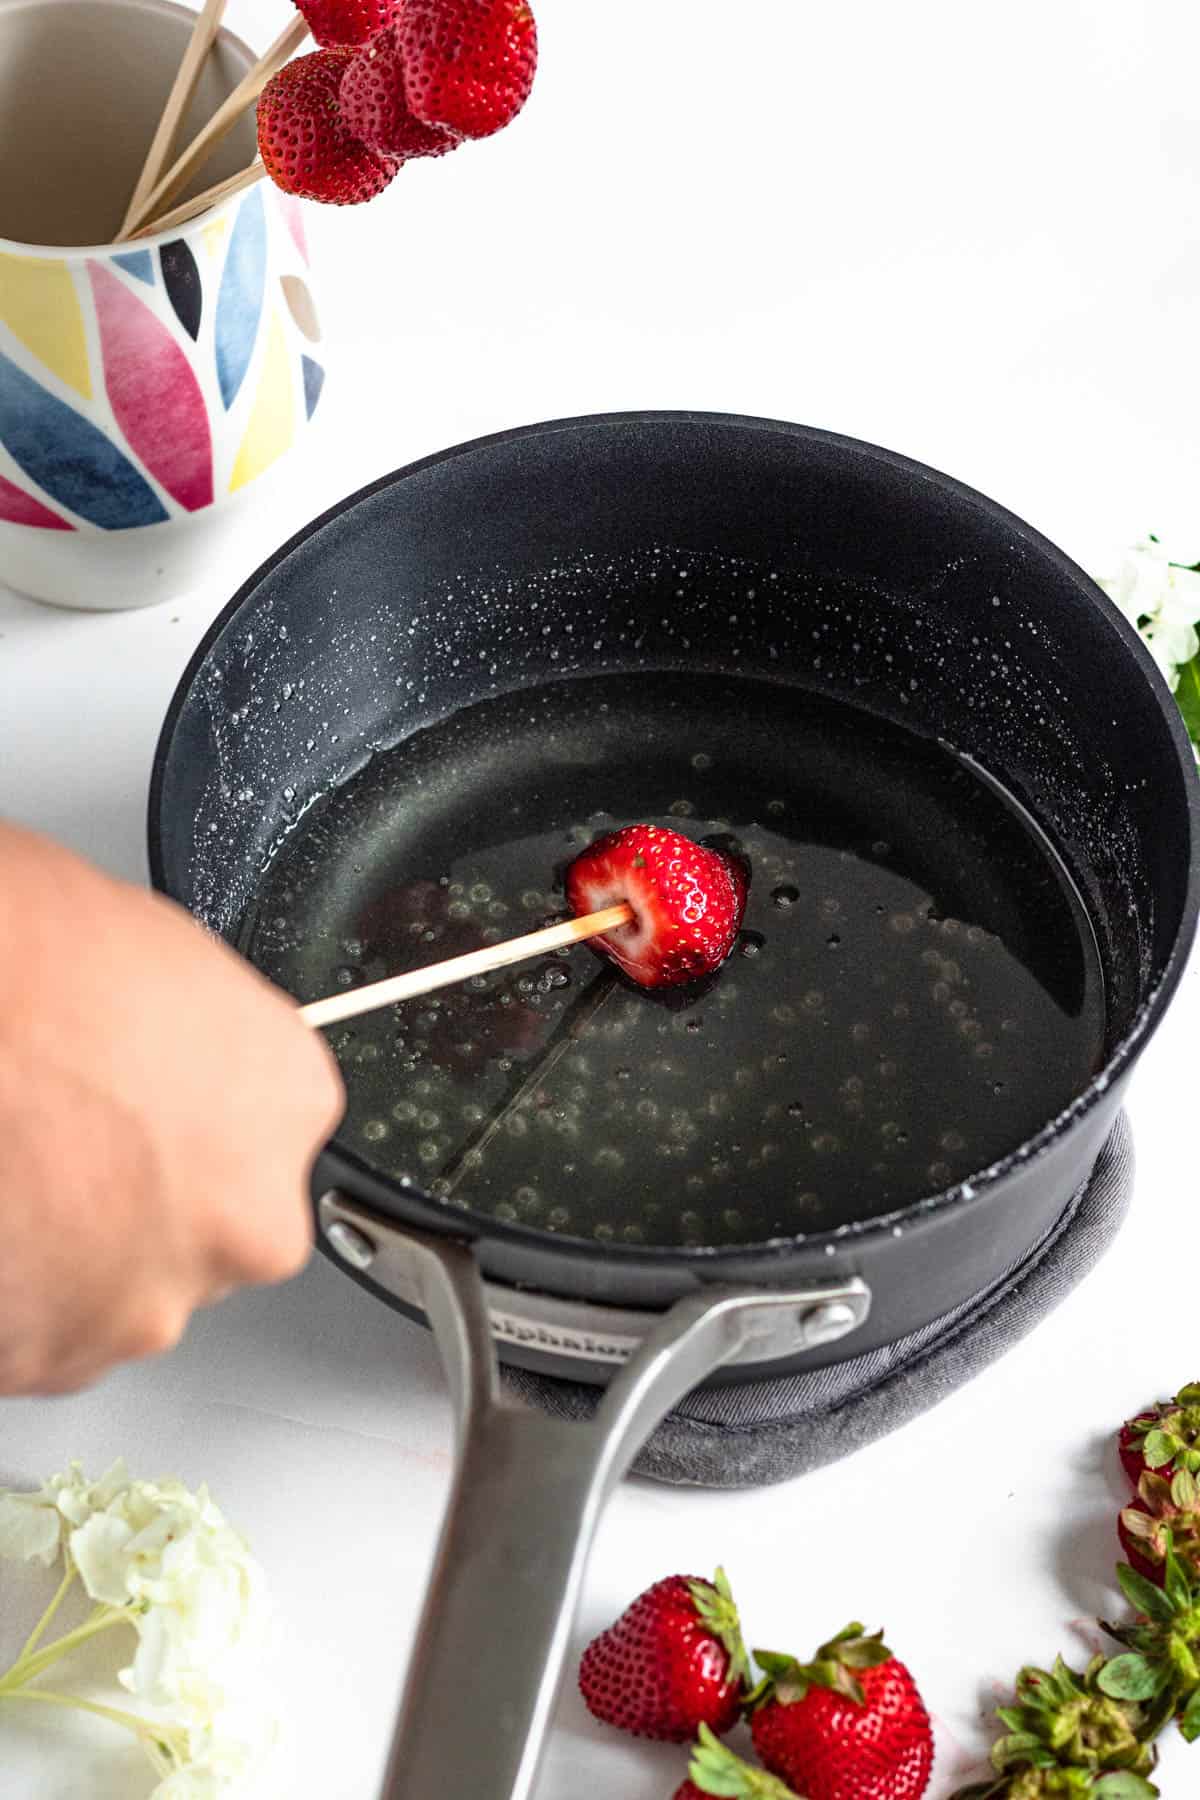 bamboo skewer with strawberry being dipped in water and sugar mixture in a pot with a light colored background